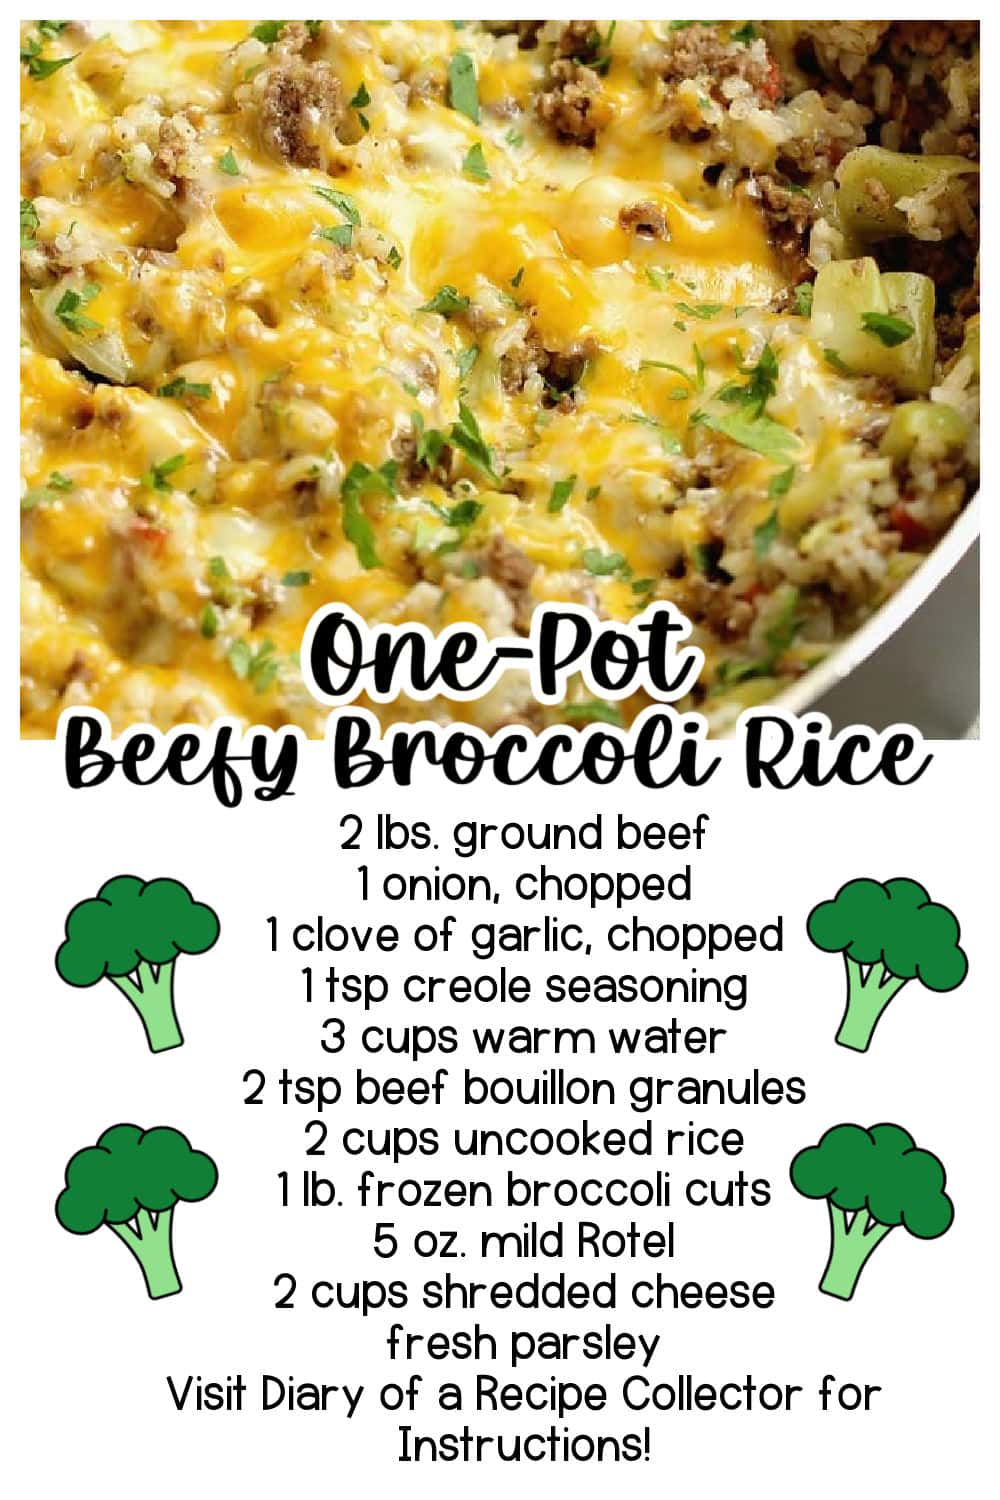 One-Pot Beefy Broccoli Rice - A quick, easy, and hearty one-pot supper filled with ground beef, broccoli, rice and topped with cheese.